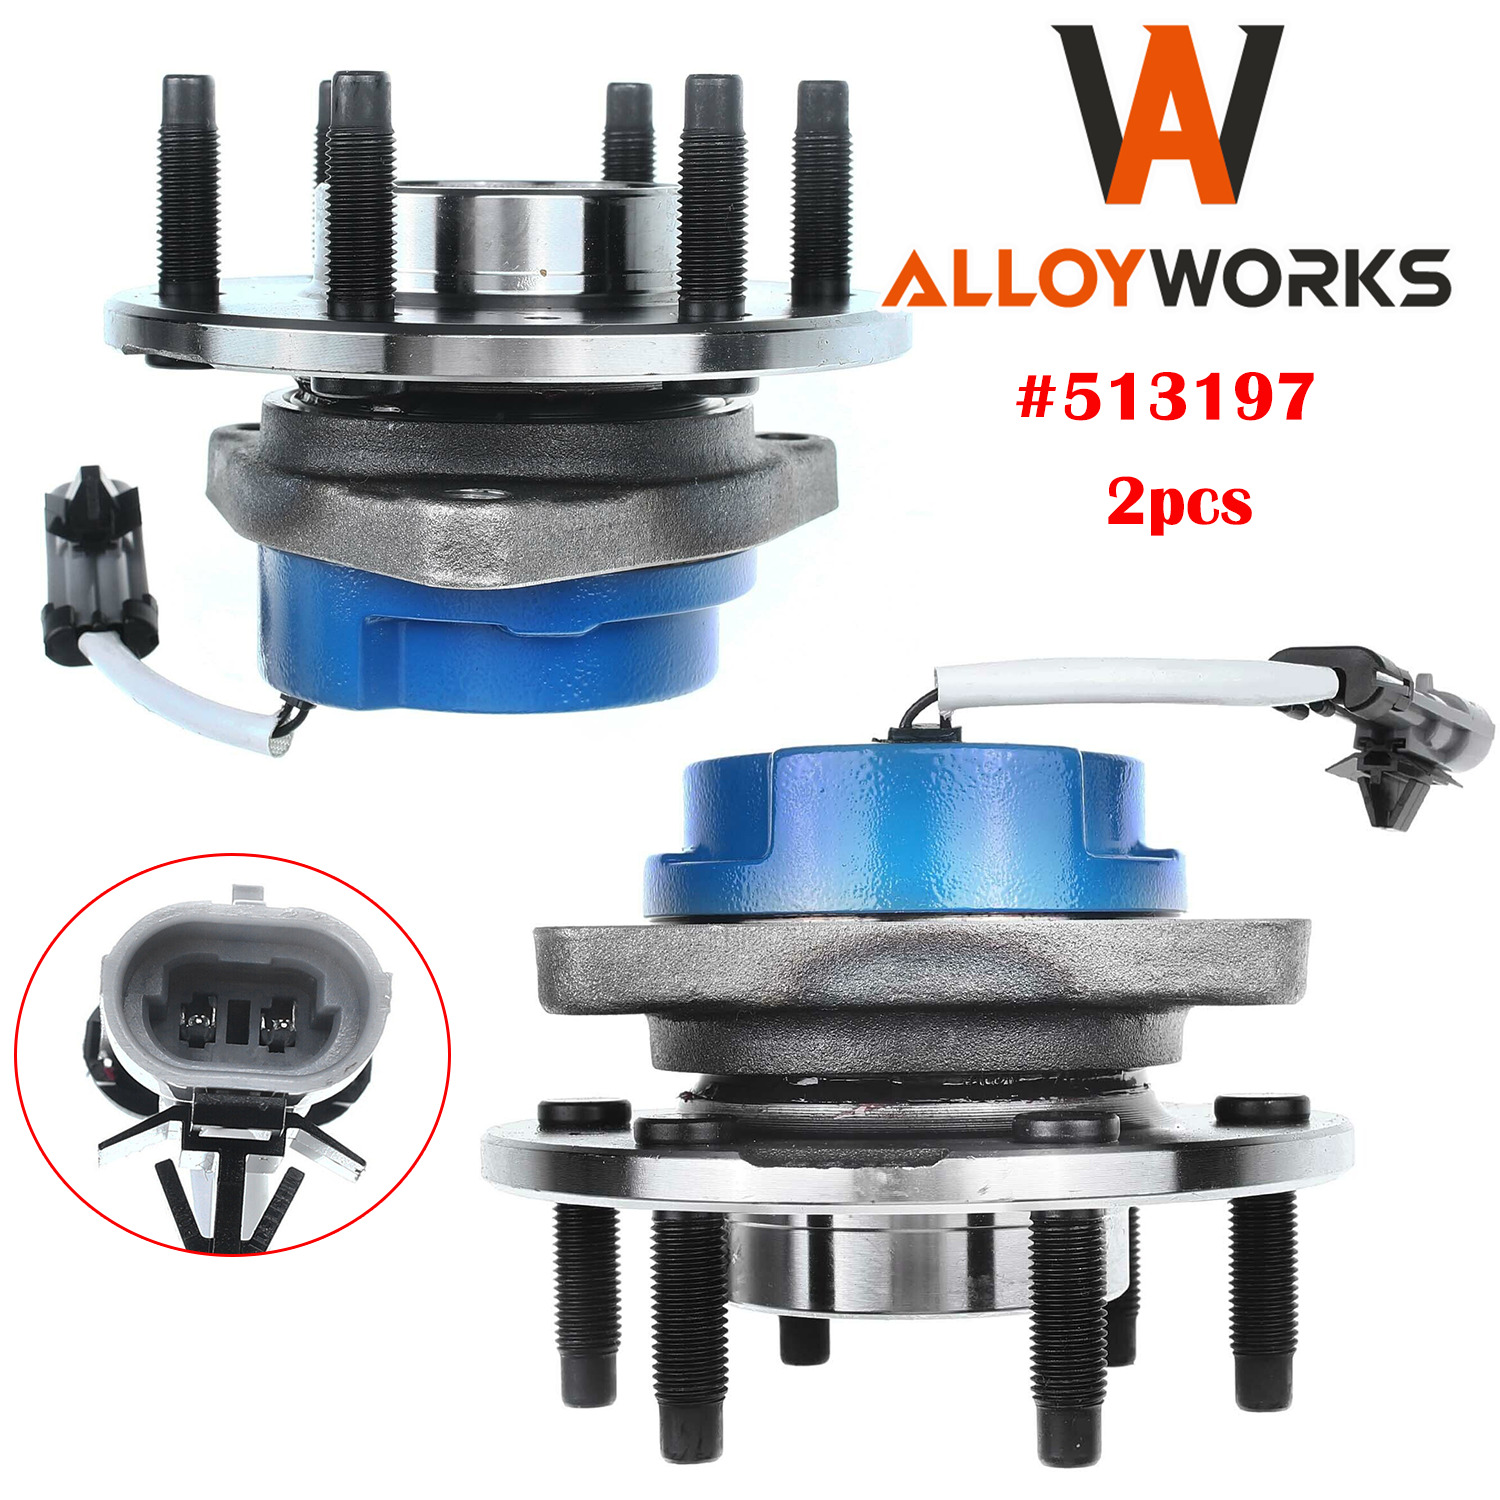 2pcs Wheel Hub Bearing for Chevy Uplander Cadillac STS SRX CTS with ABS 3.9L V6